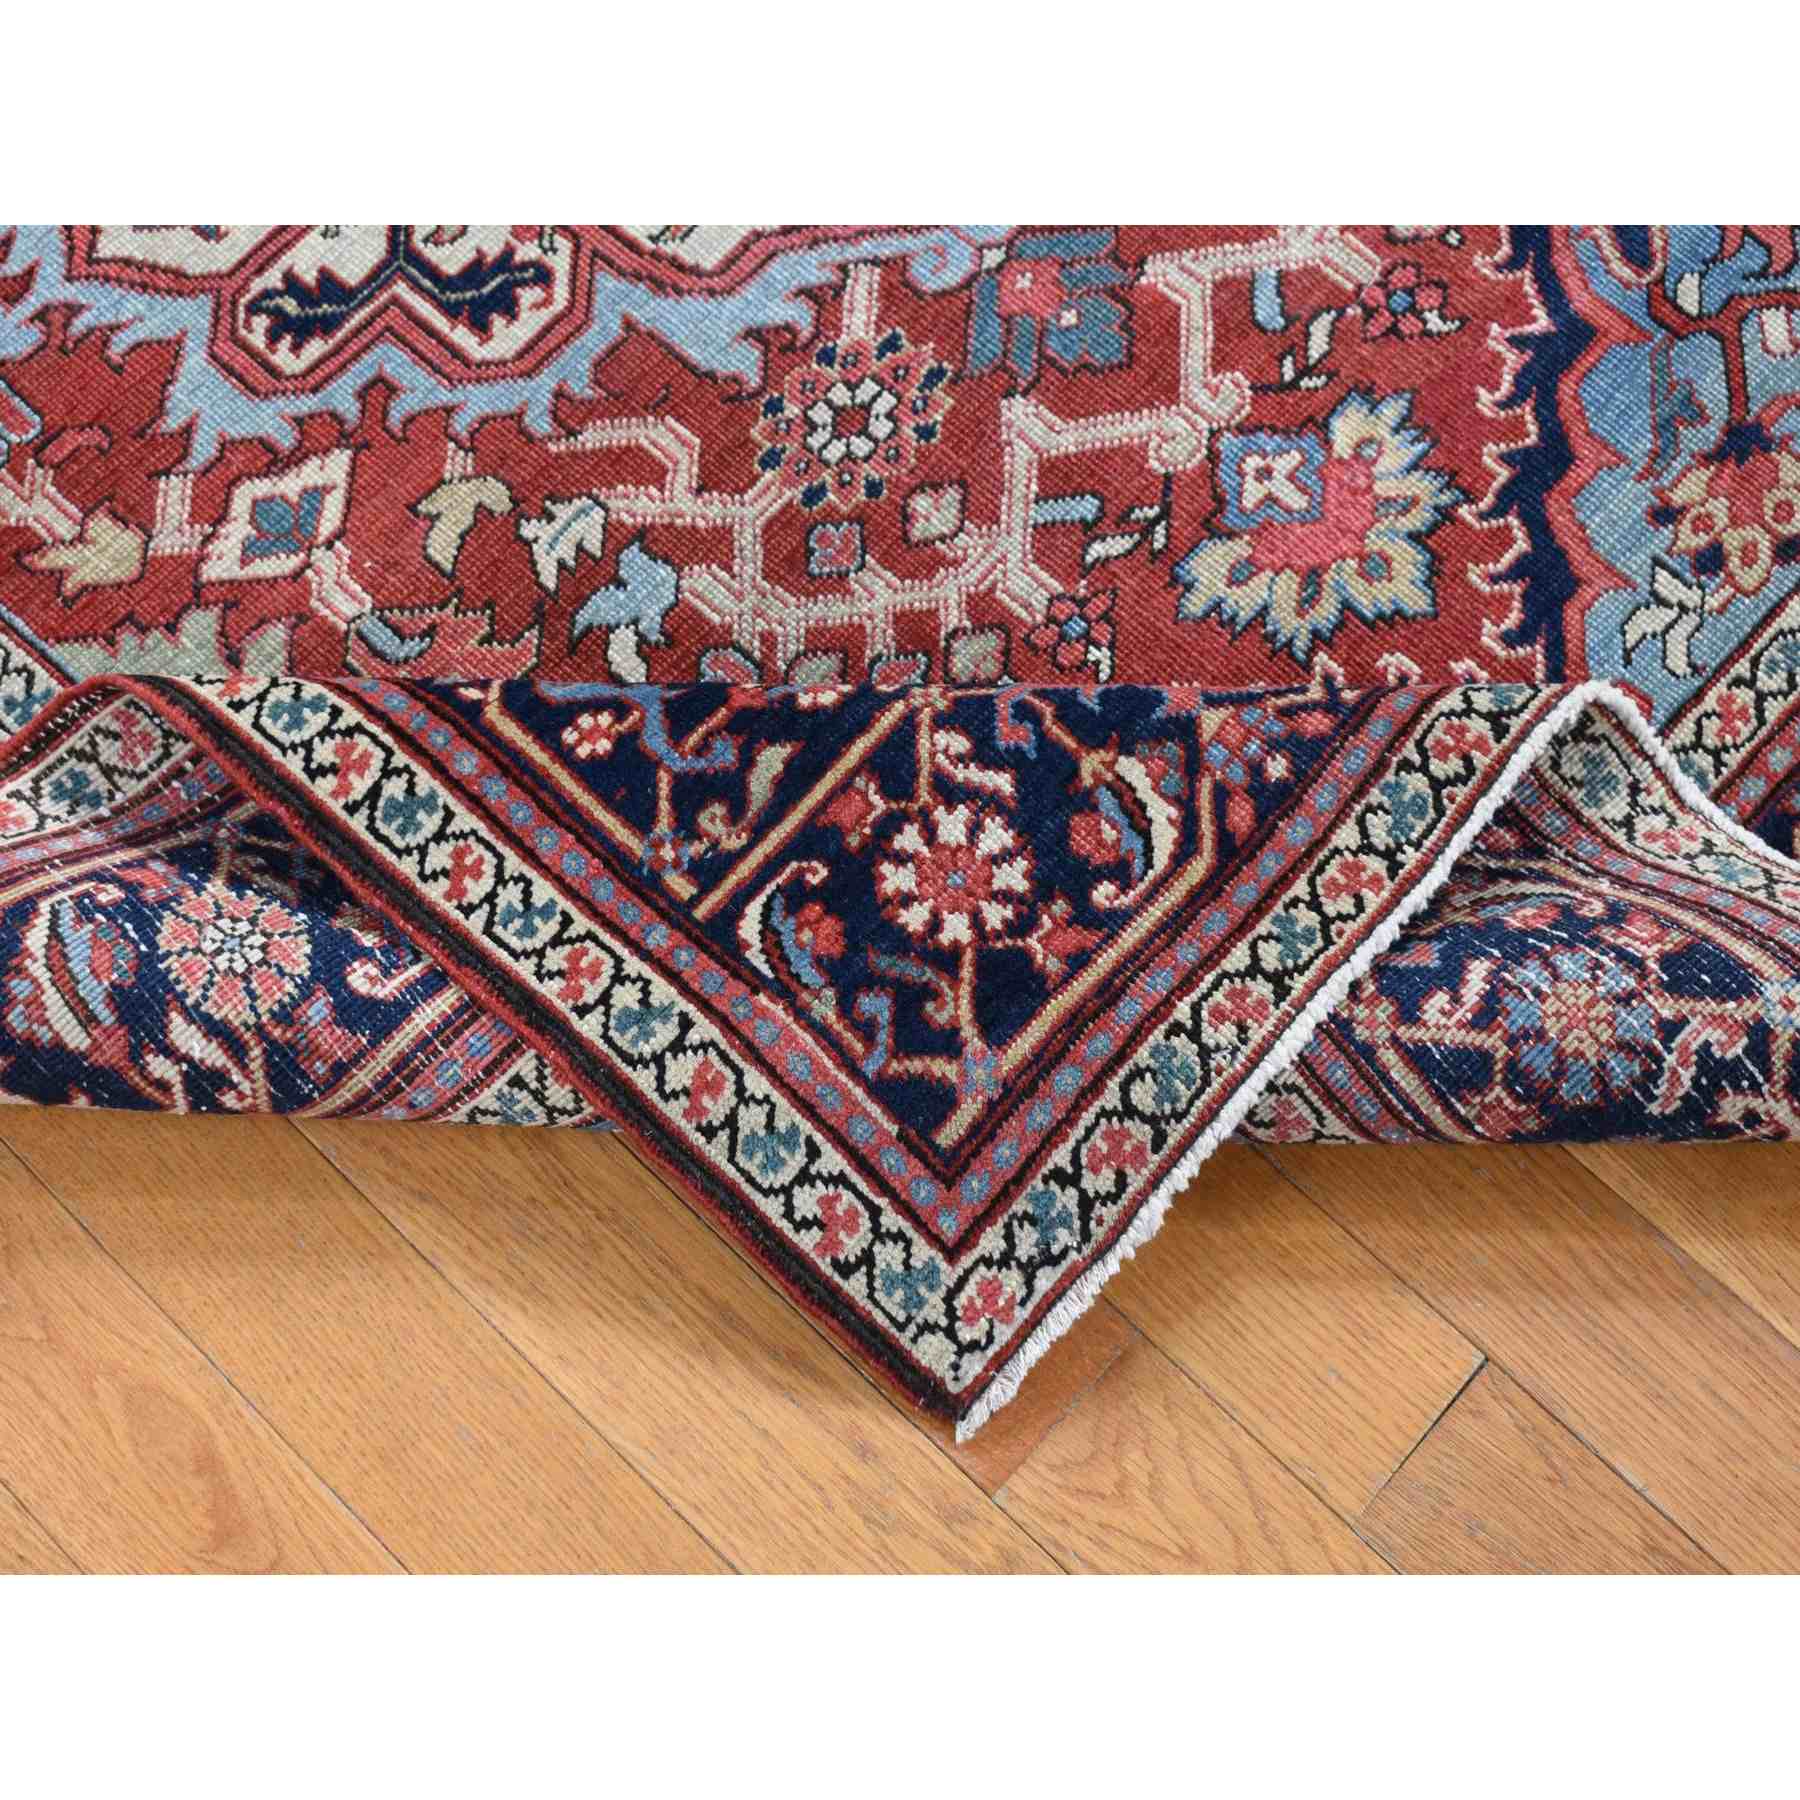 Antique-Hand-Knotted-Rug-403540